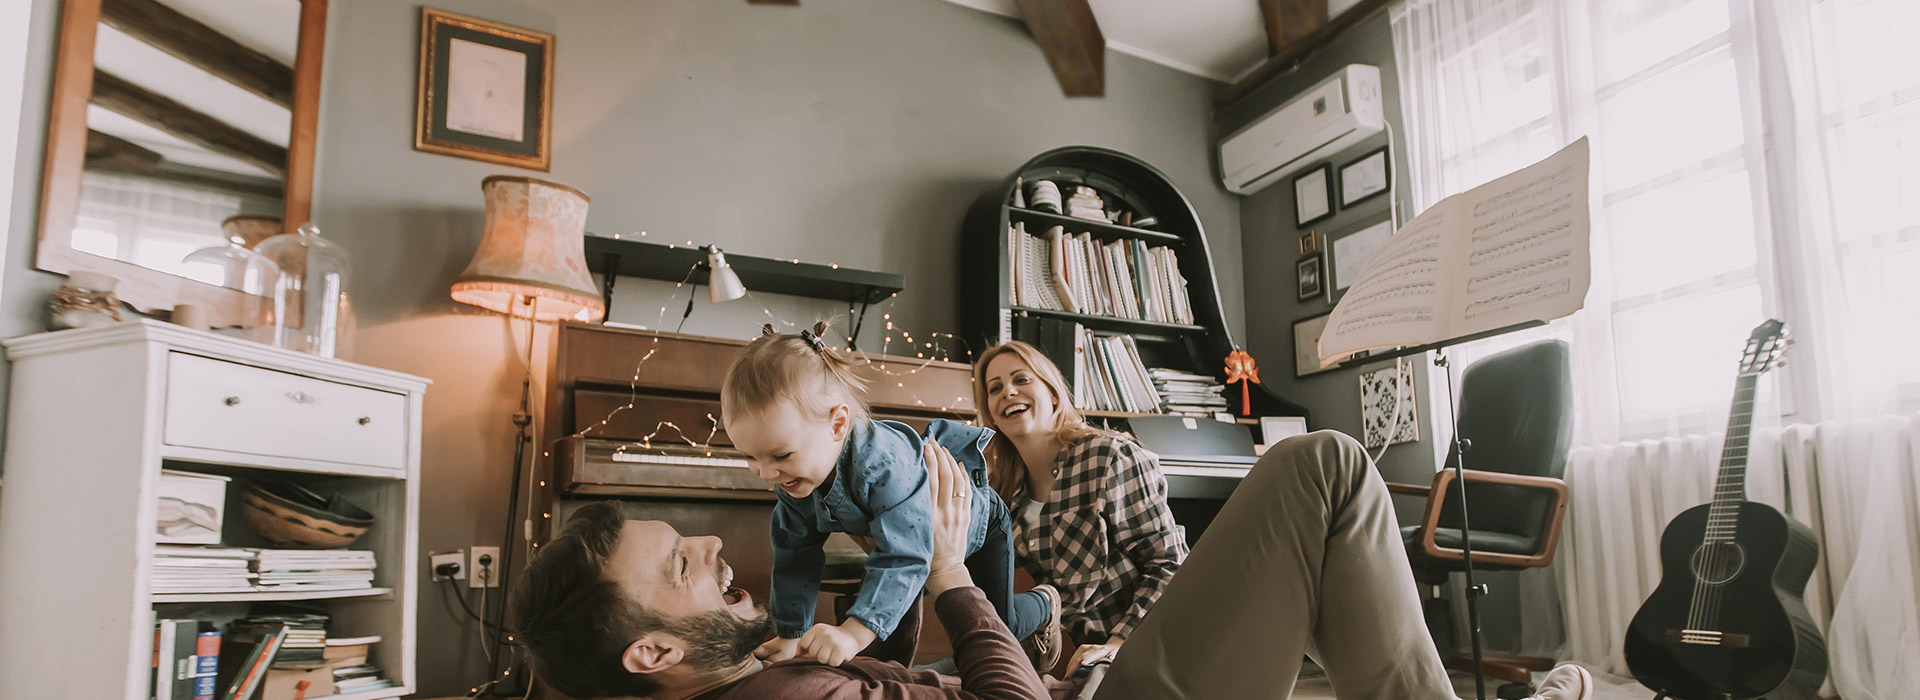 Family music room with a father laying on his back while he holds his young daughter horizontally and the mother is also on the floor sitting behind them. They are all smiling and laughing.